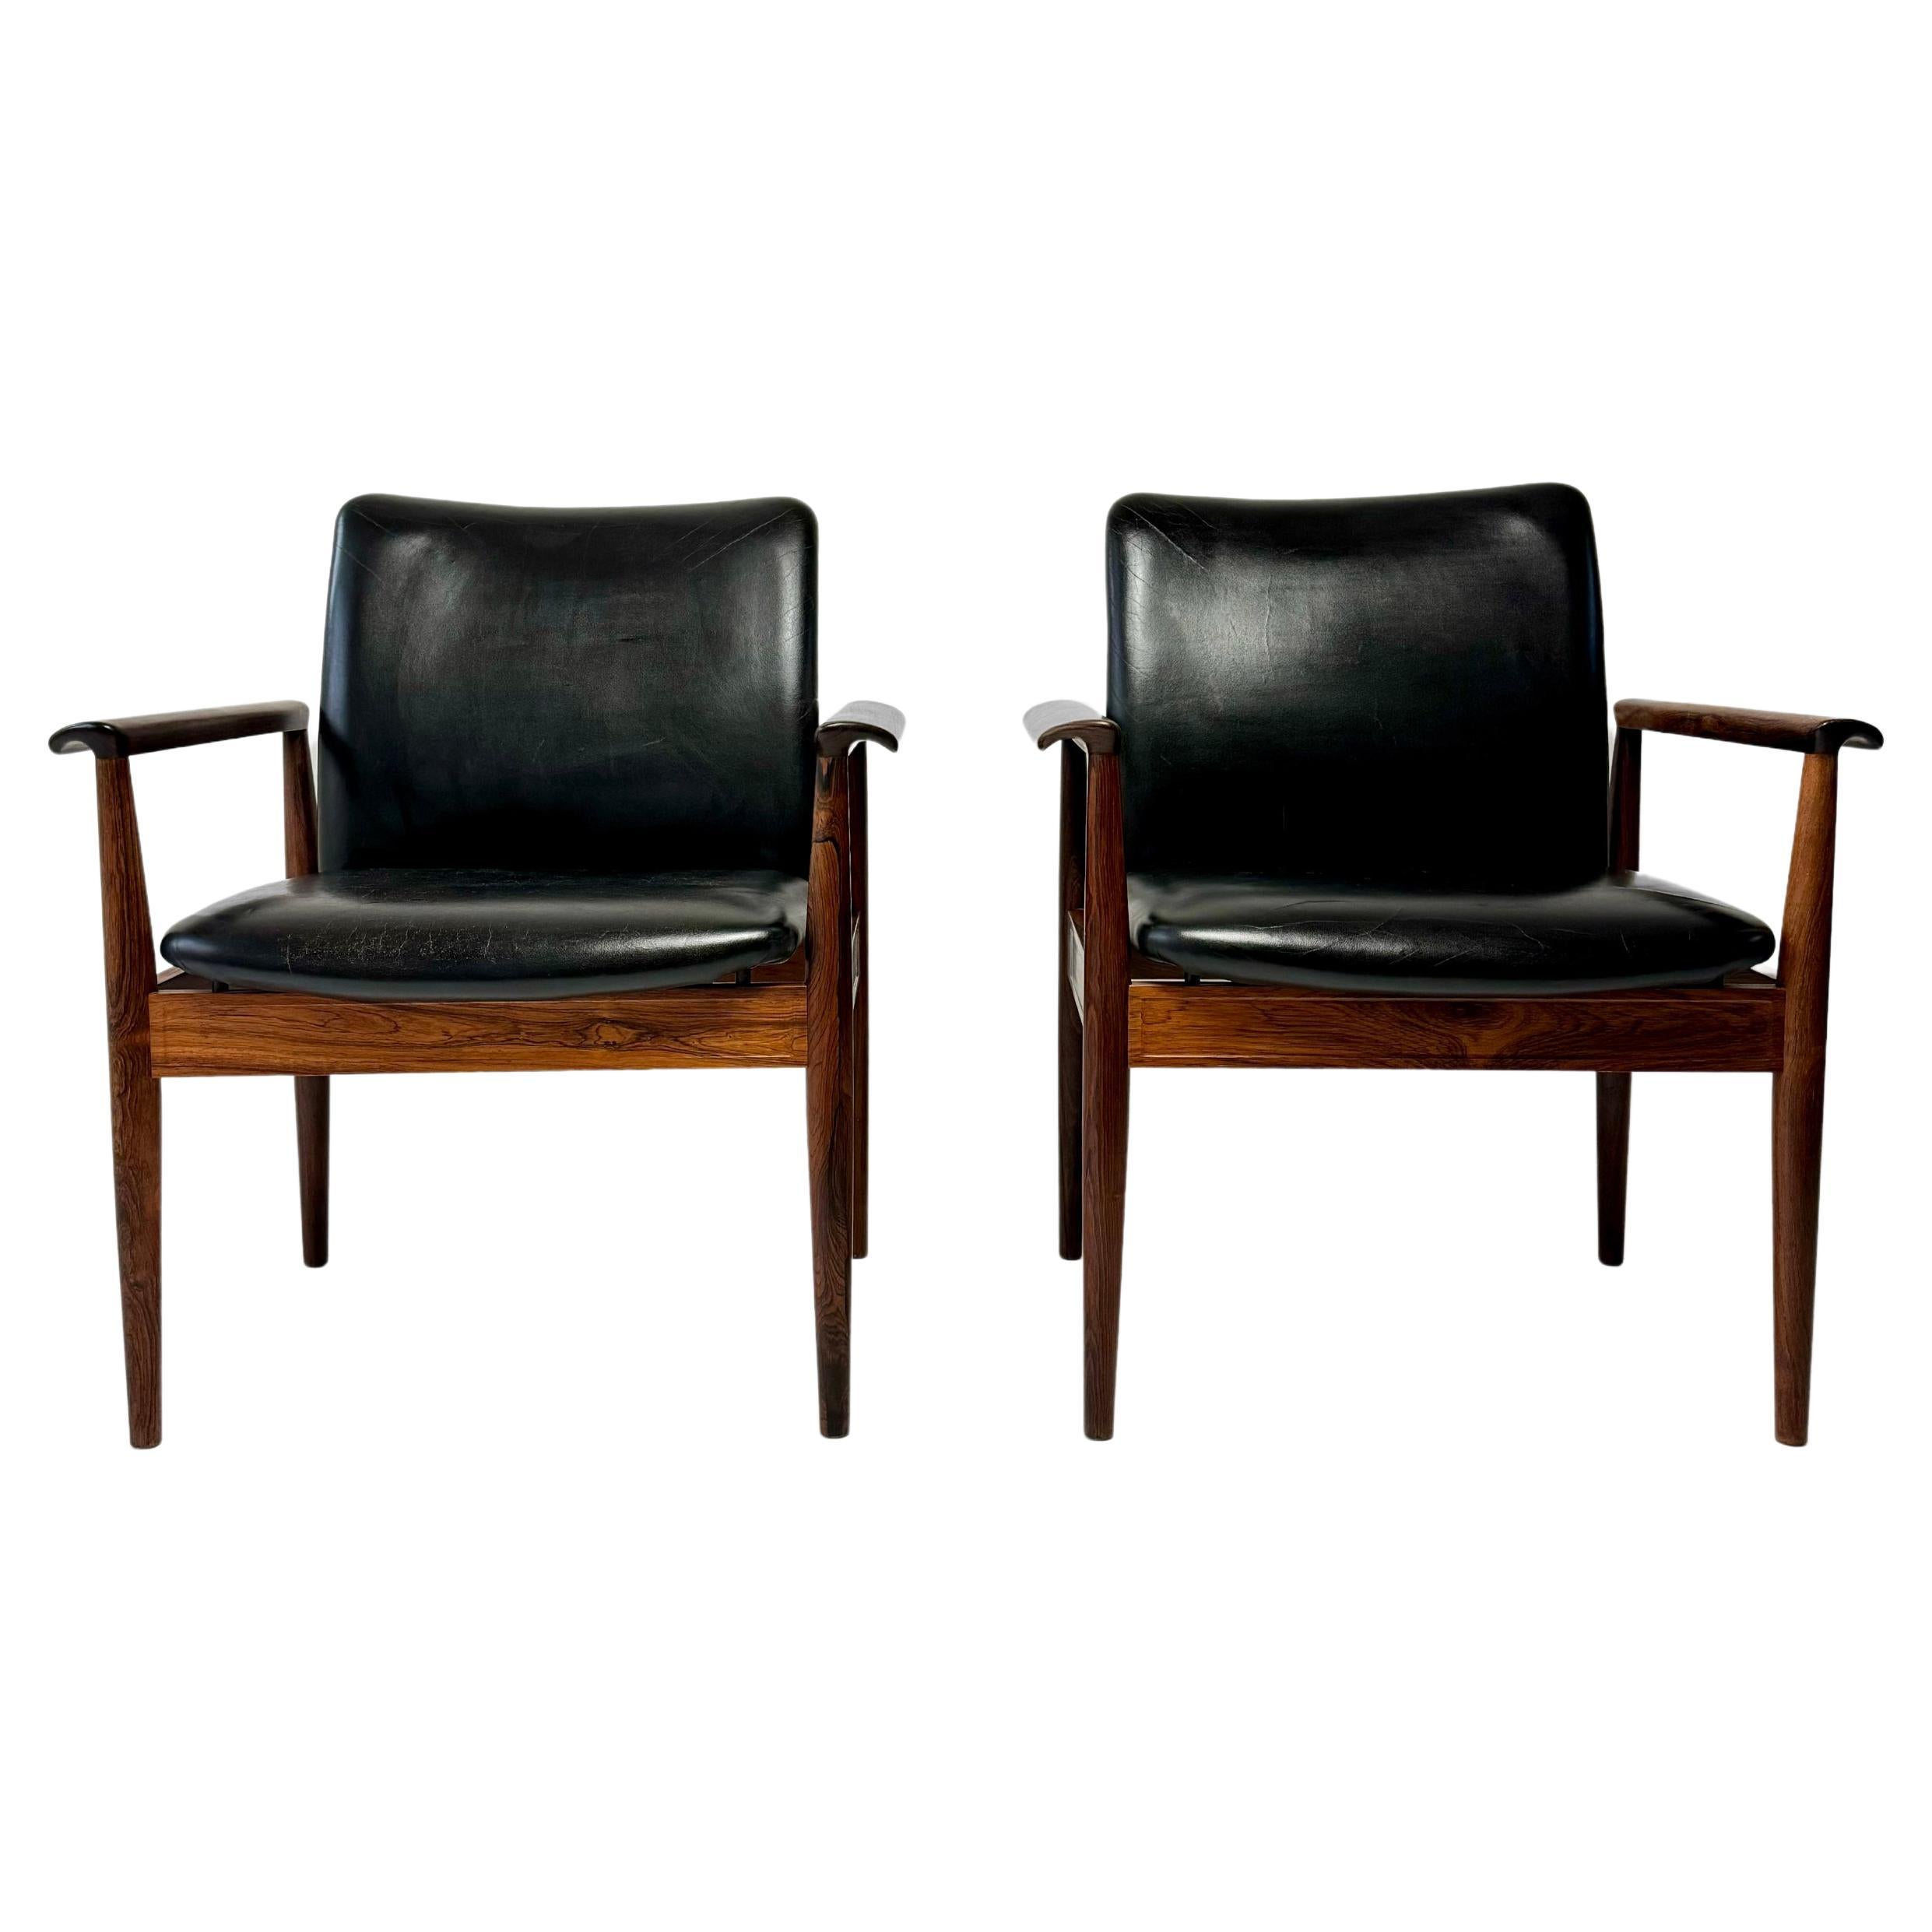 Set of Diplomat Armchairs in Rosewood and Leather by Finn Juhl, Denmark c.1960's